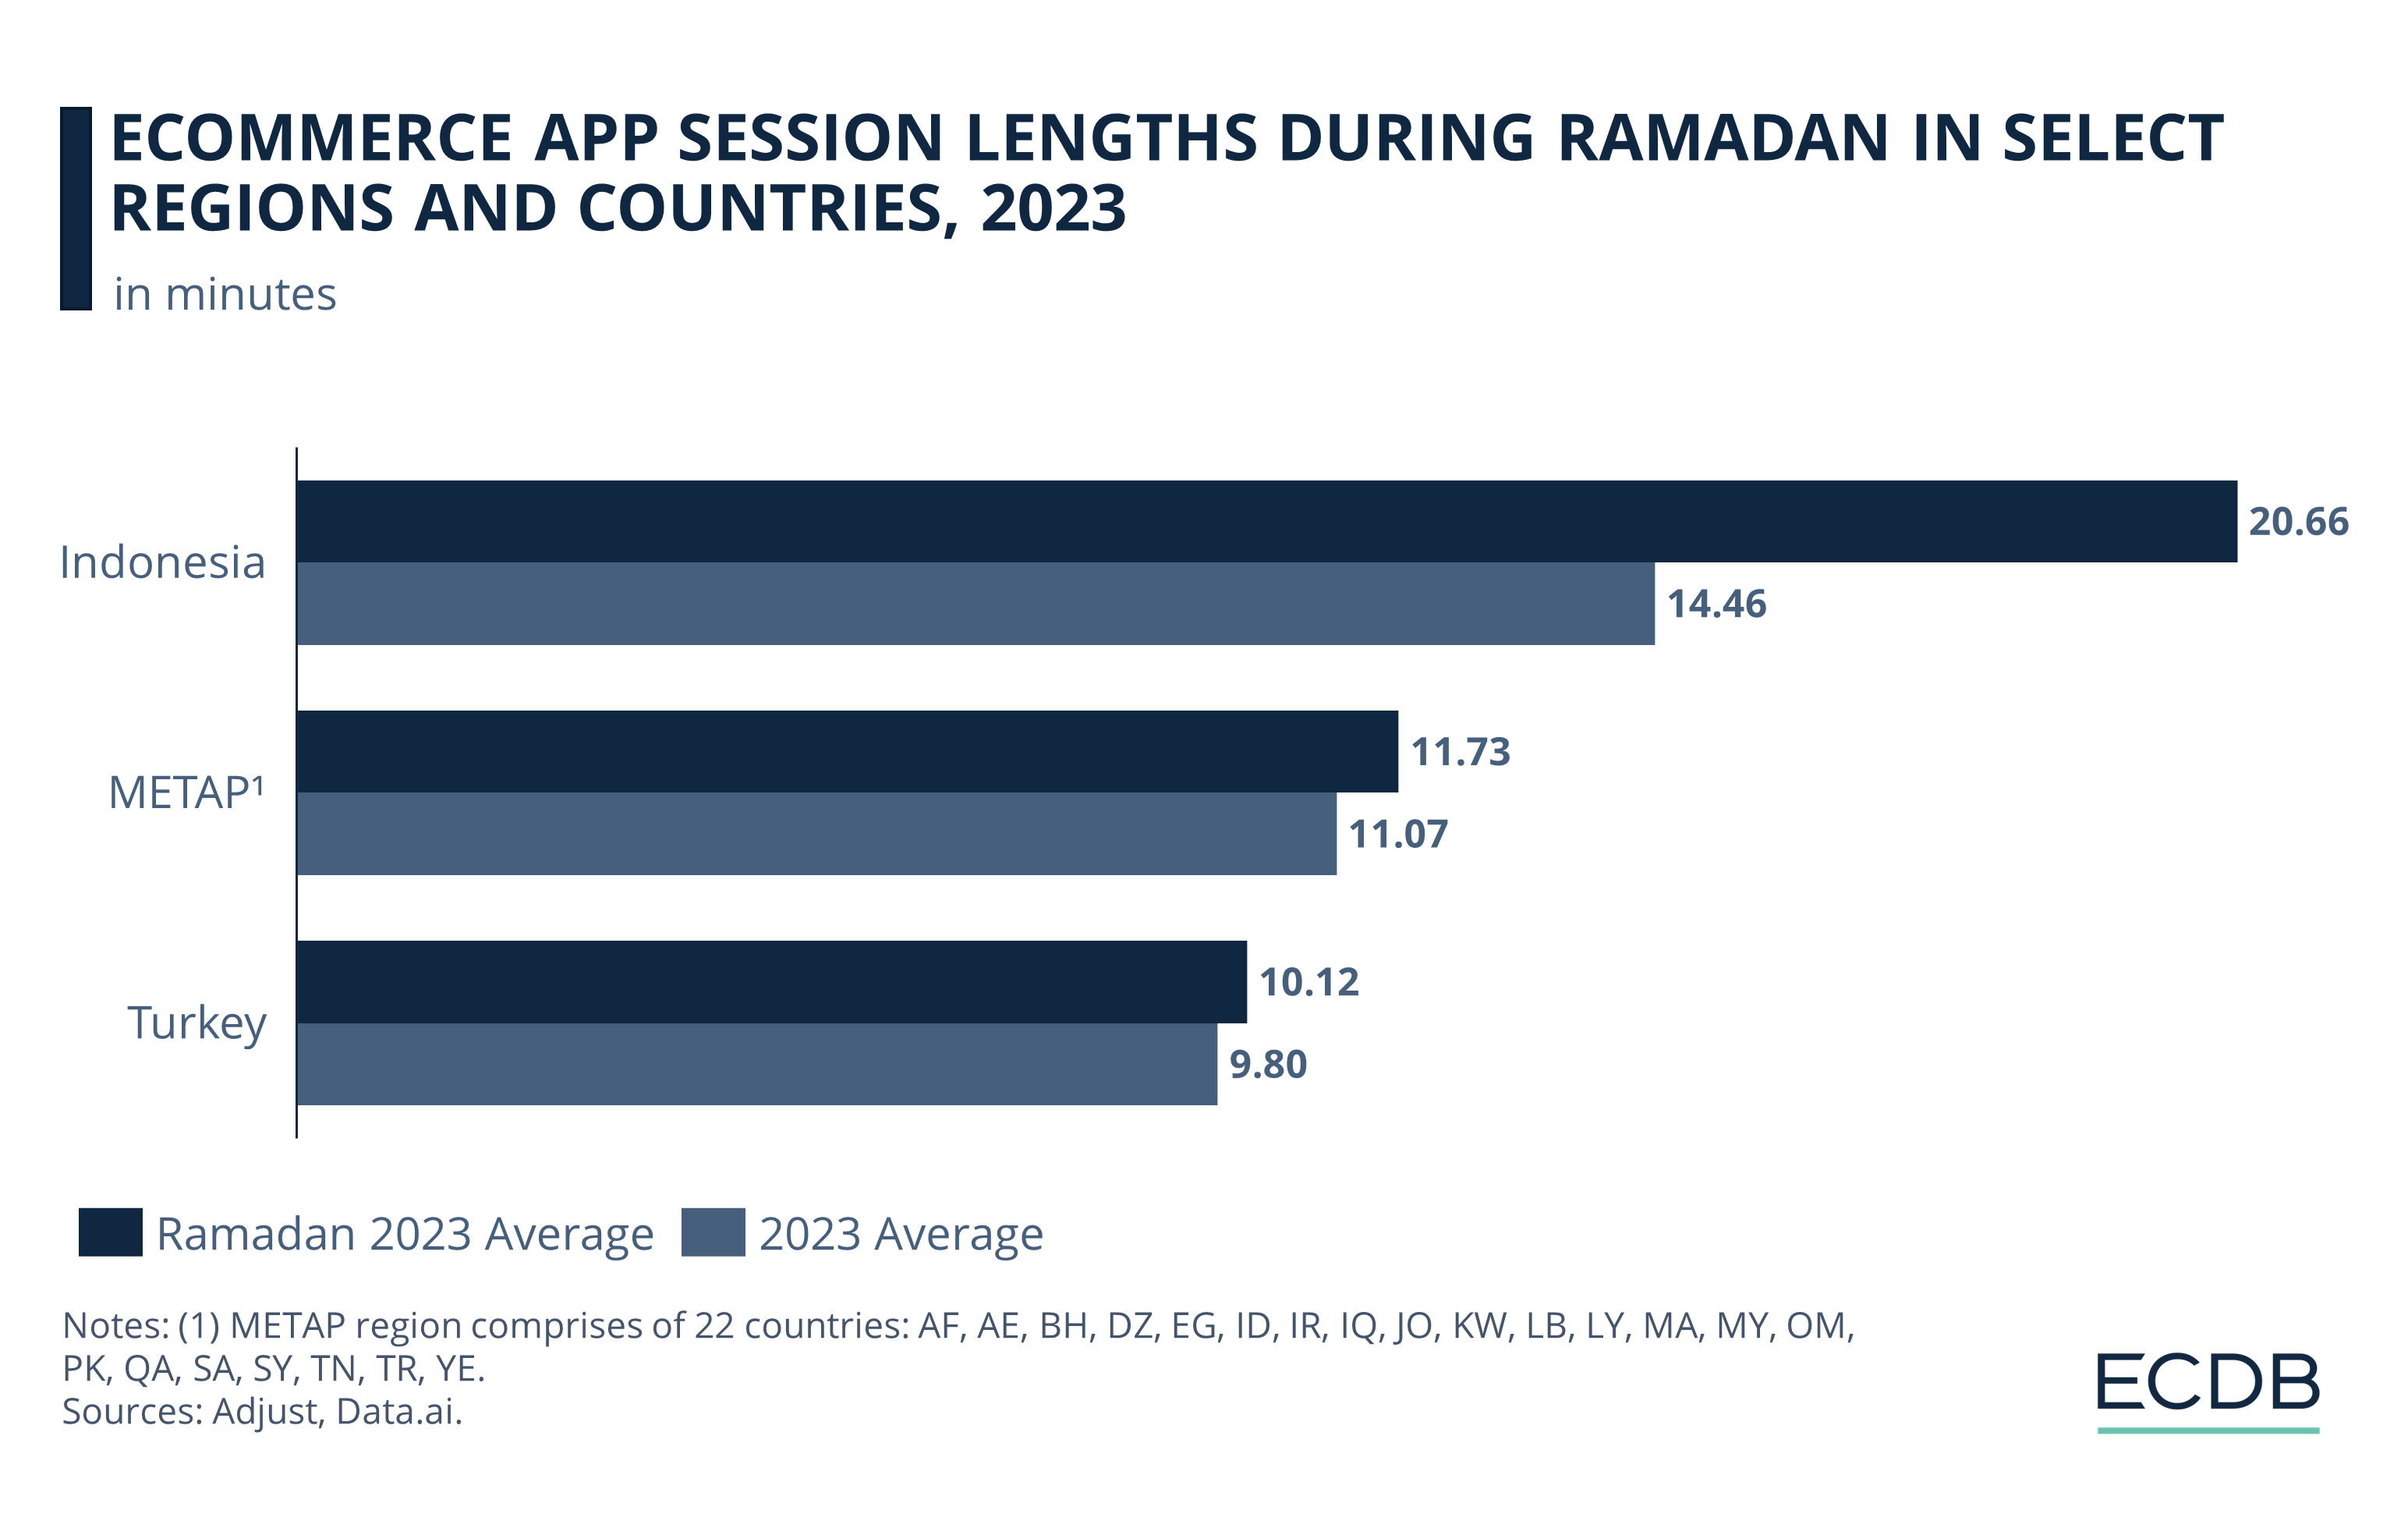 eCommerce App Session Lengths During Ramadan in Select Regions and Countries, 2023